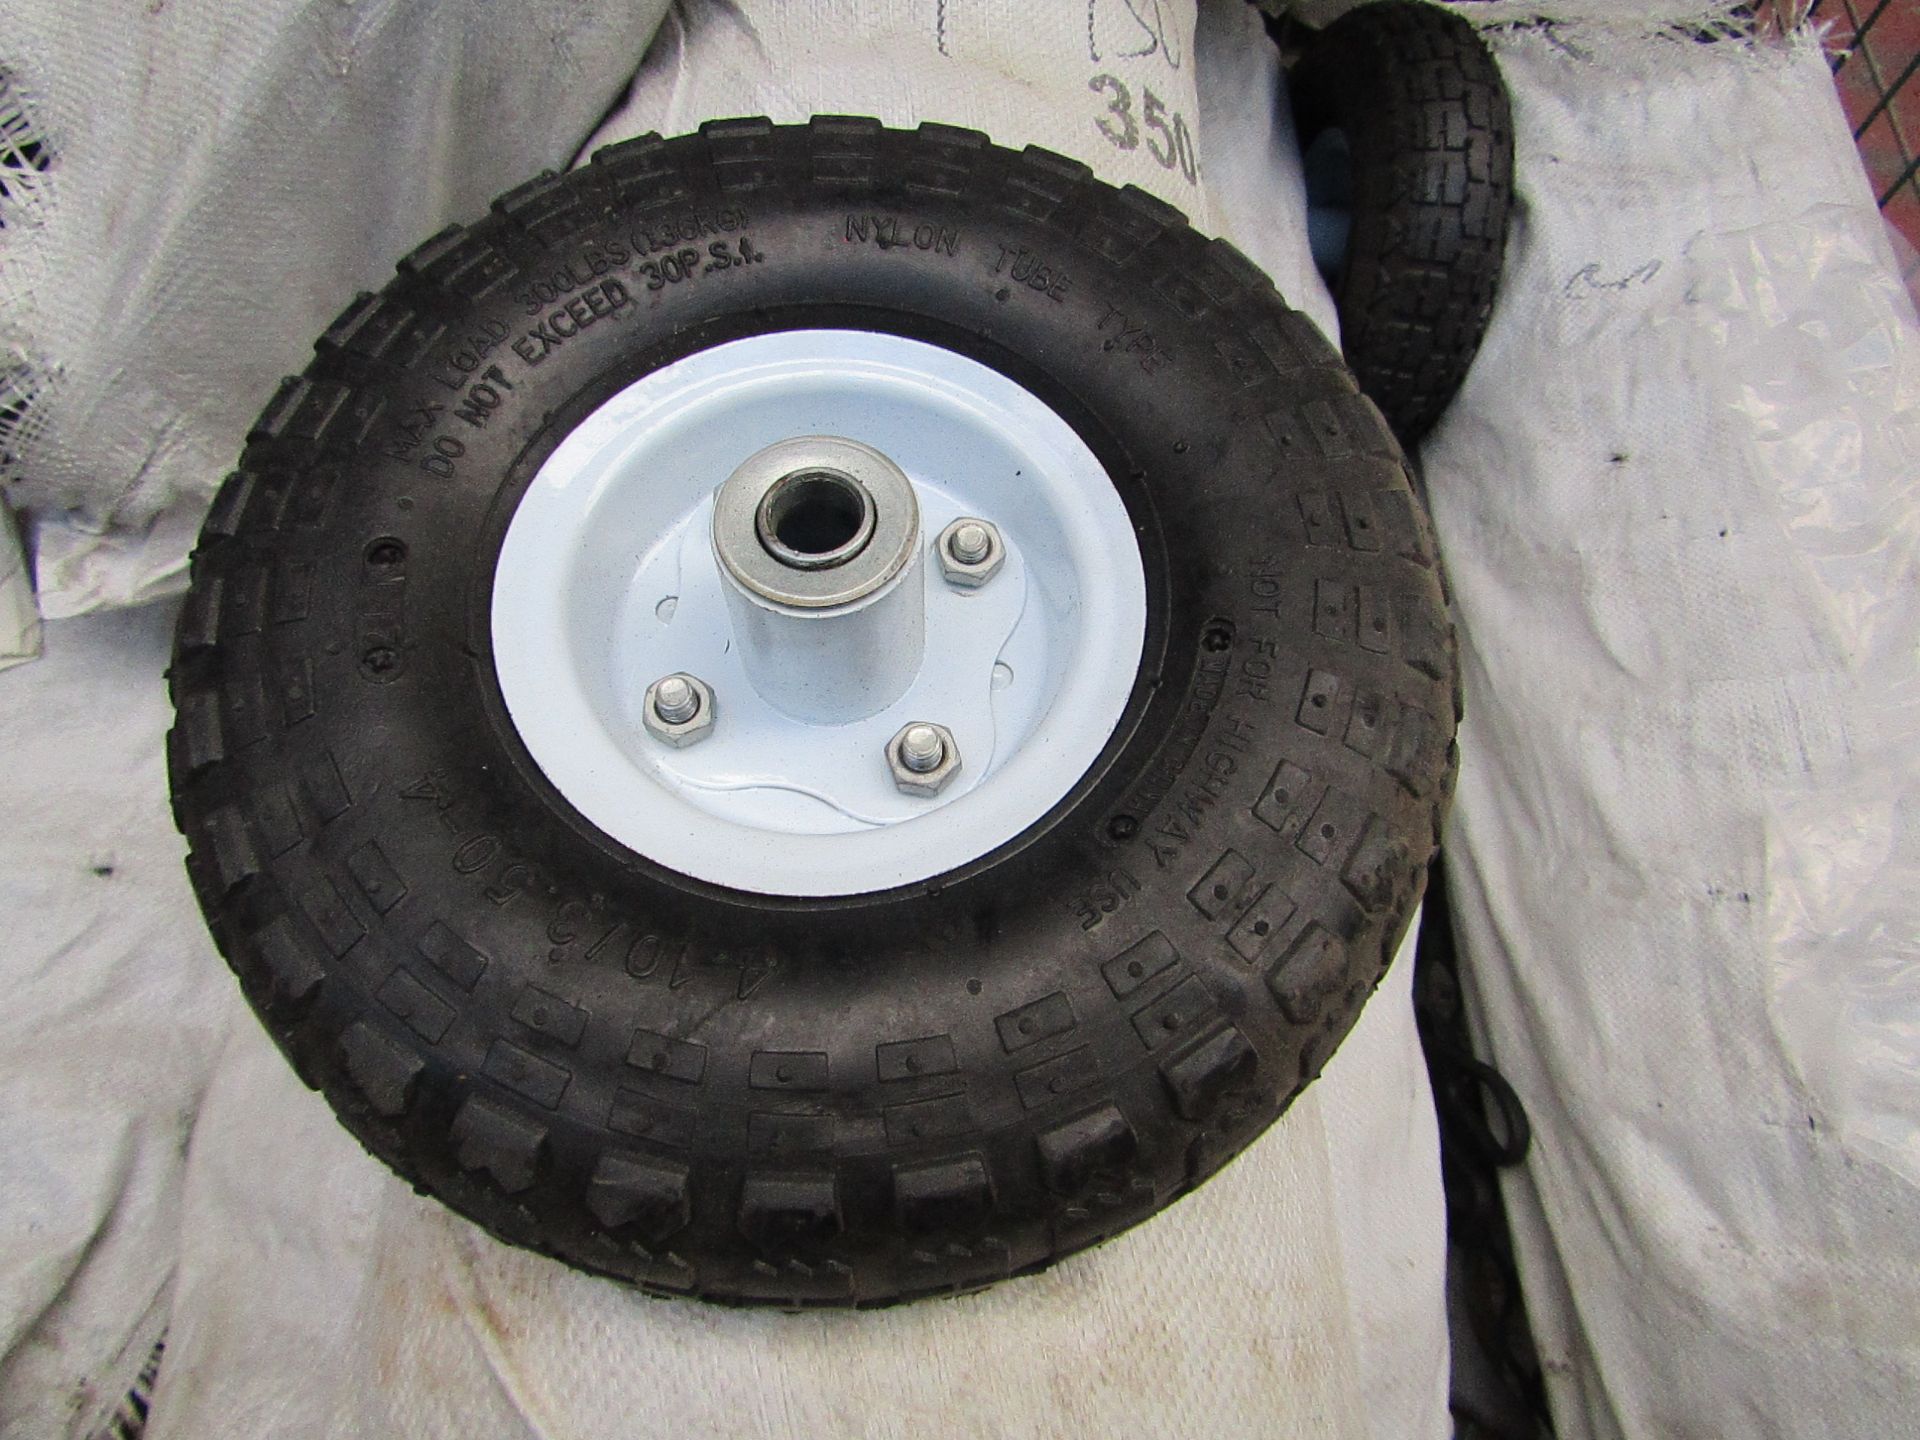 Replacement sack truck wheel, new